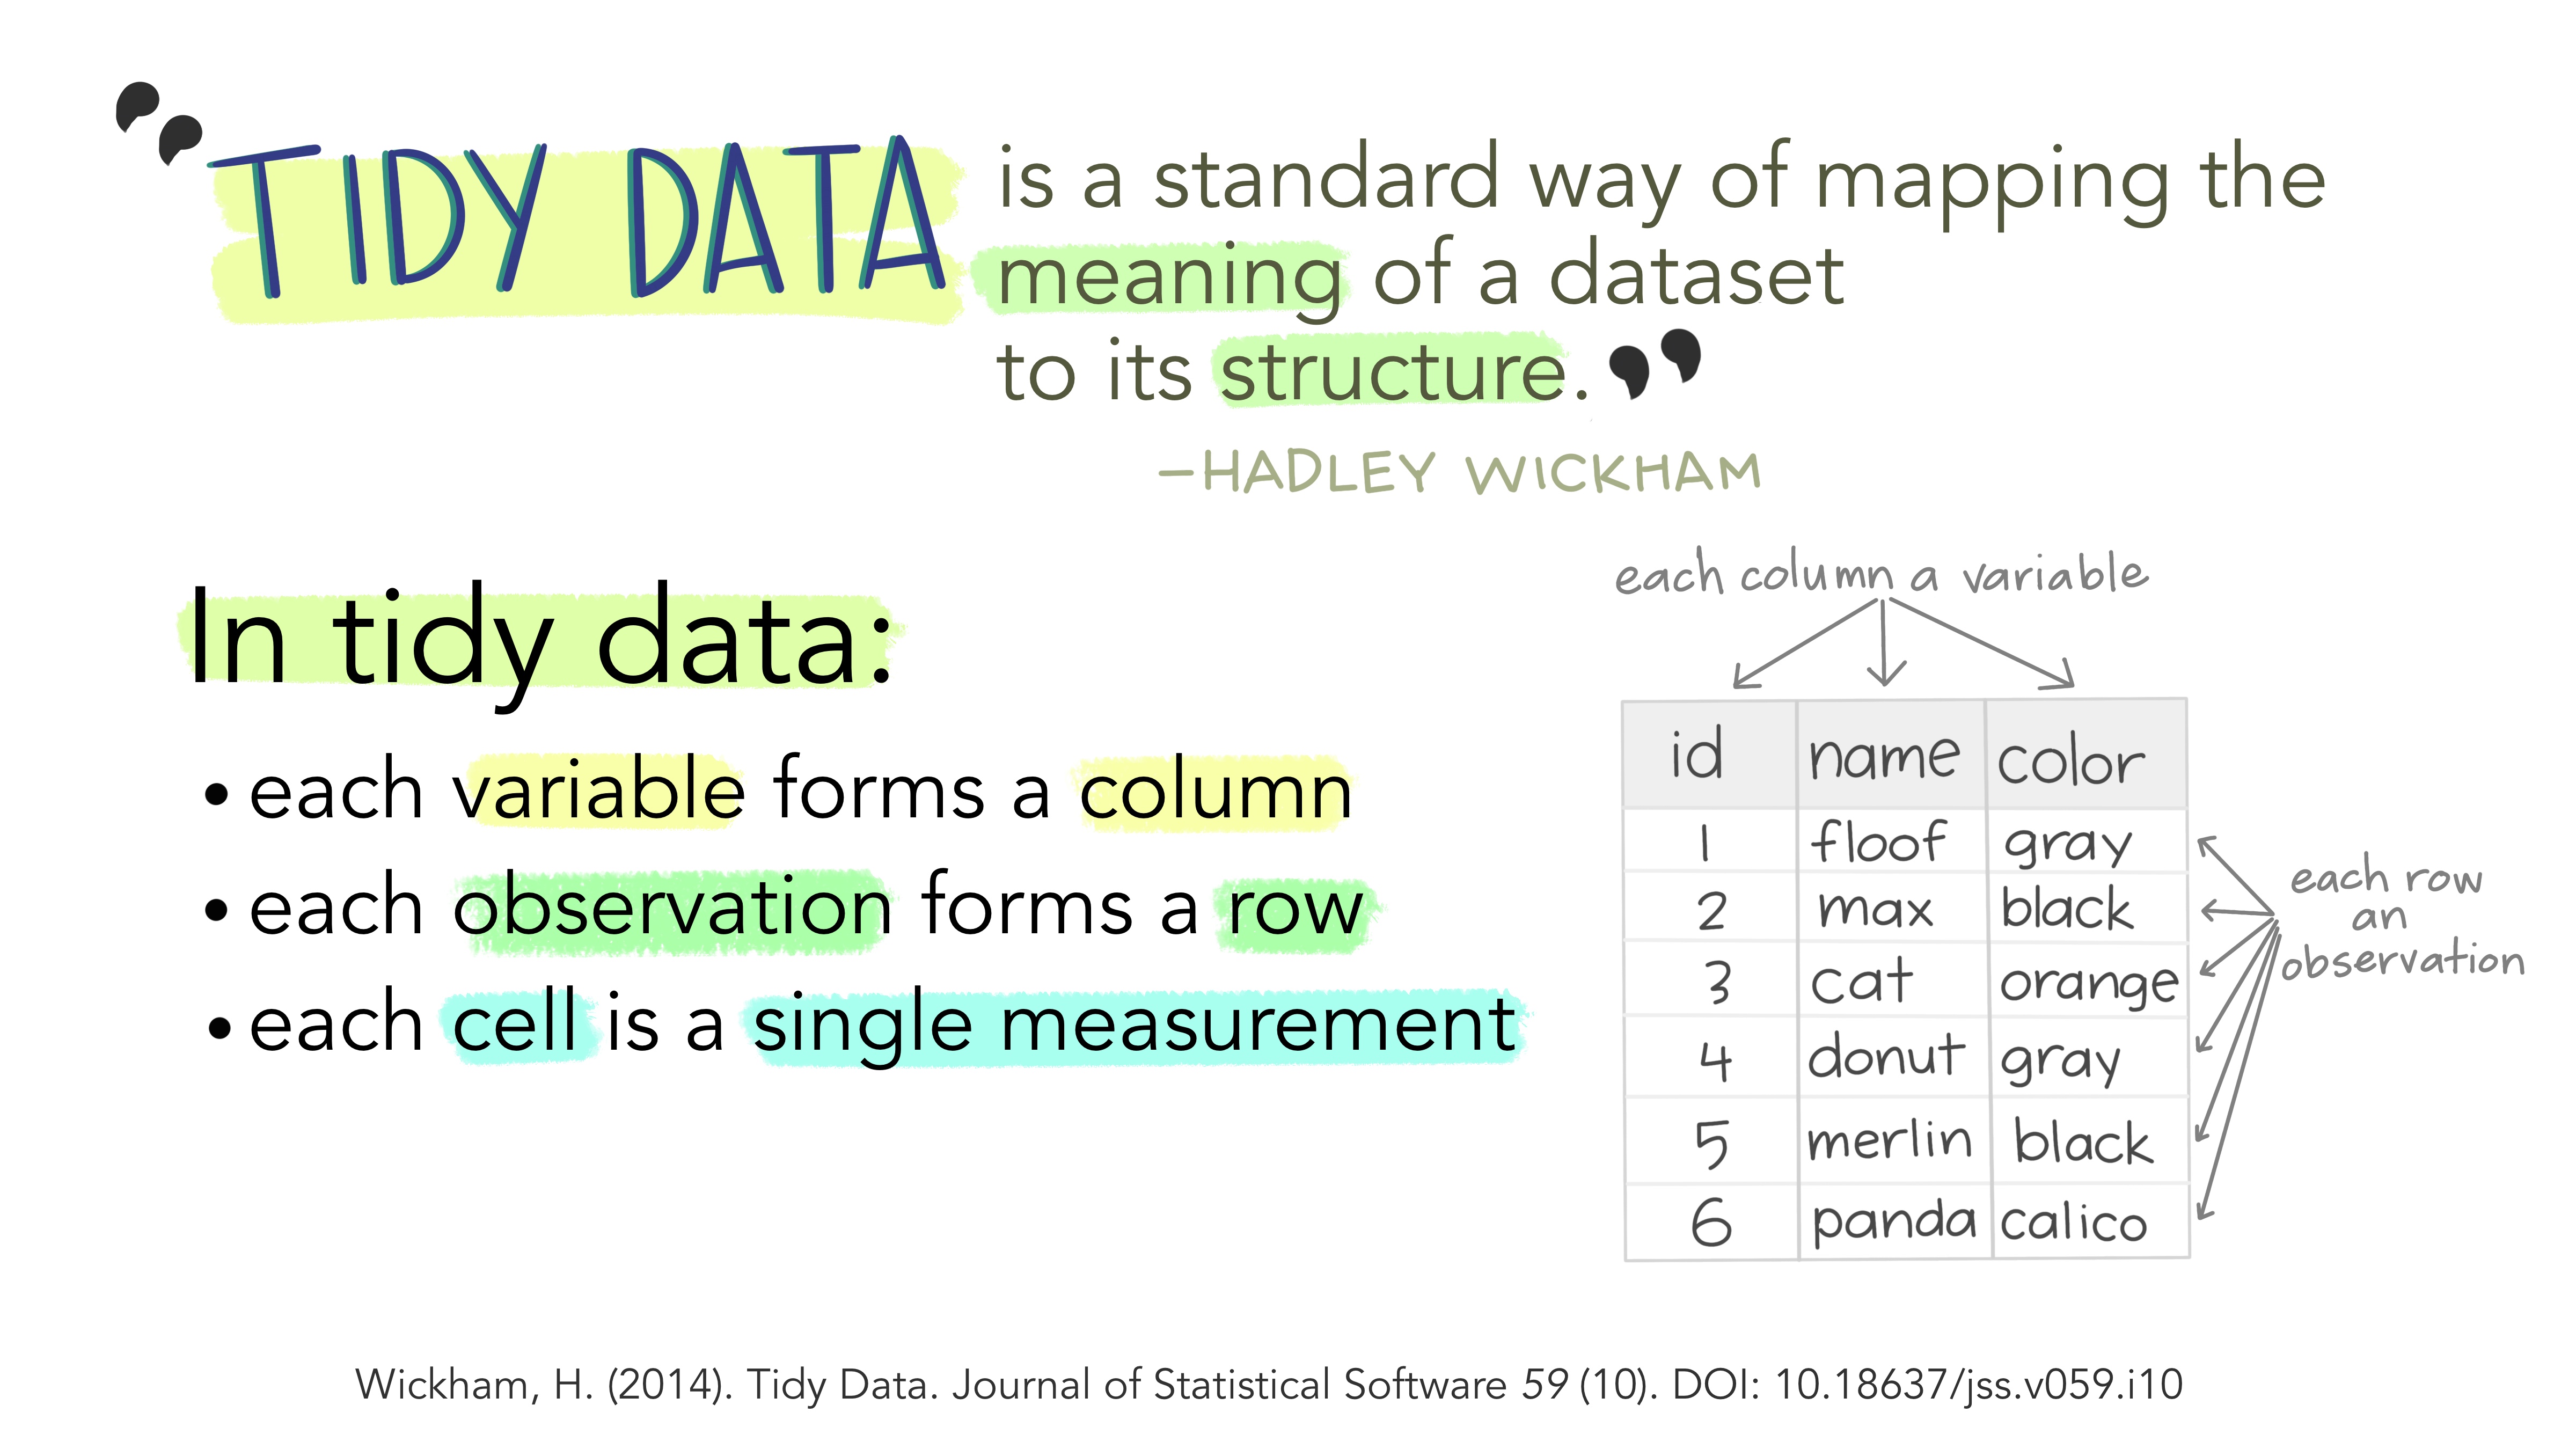 tidy data is a standard way of mapping the meaning of a dataset to its structure; in tidy data, each variable forms a column, each observation forms a row, and each cell is a single measure